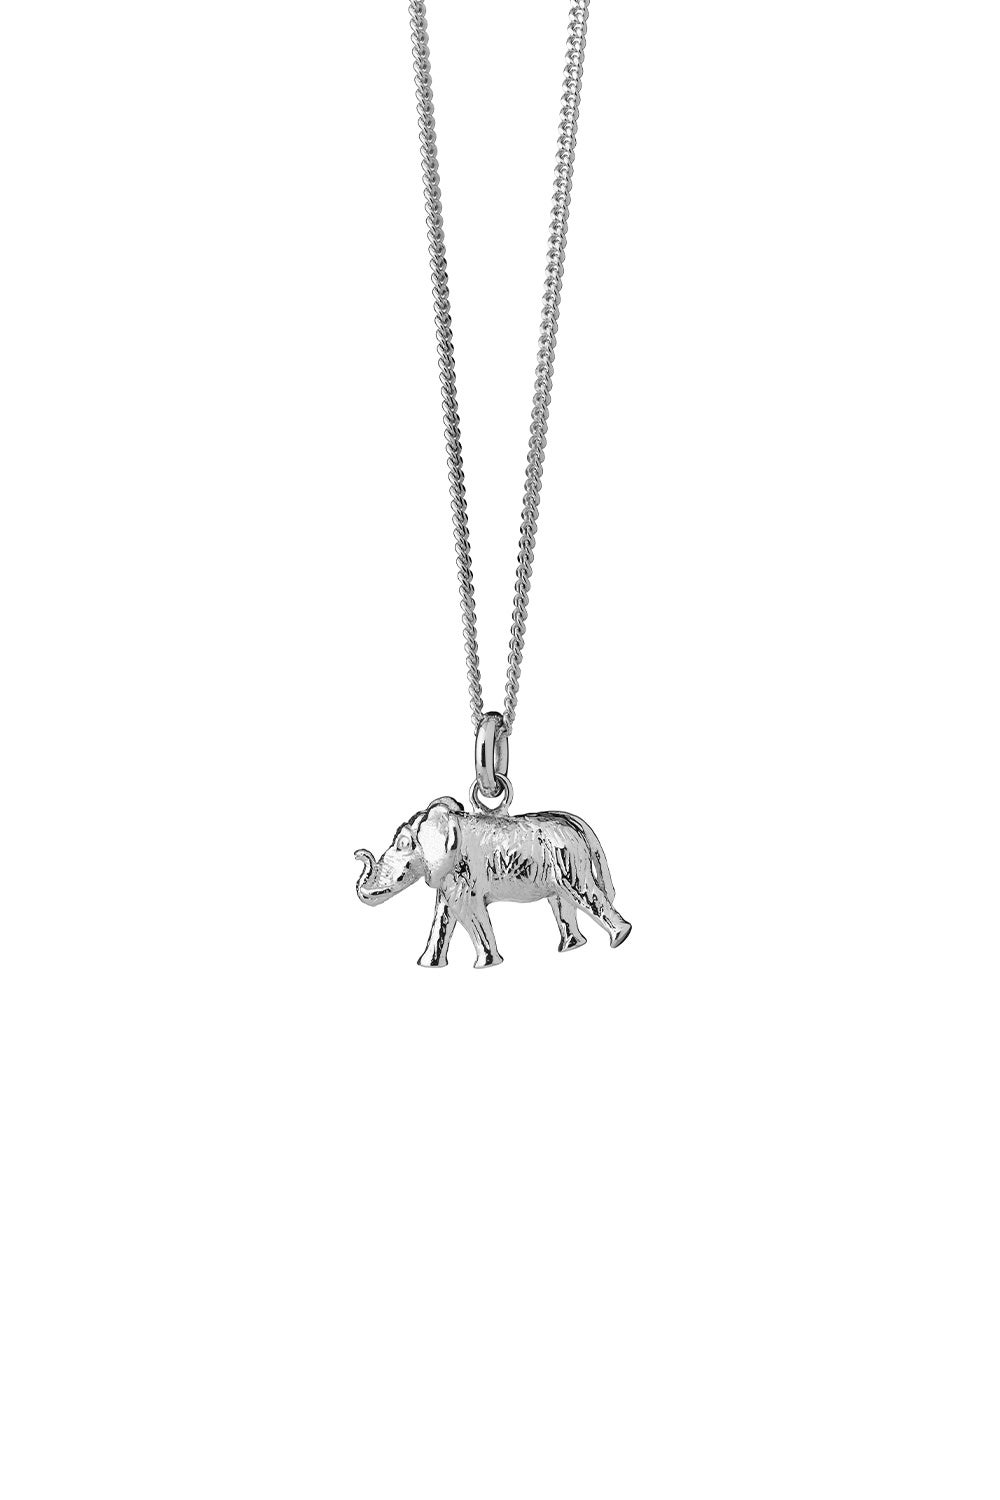 Elephant Necklace Sterling Silver